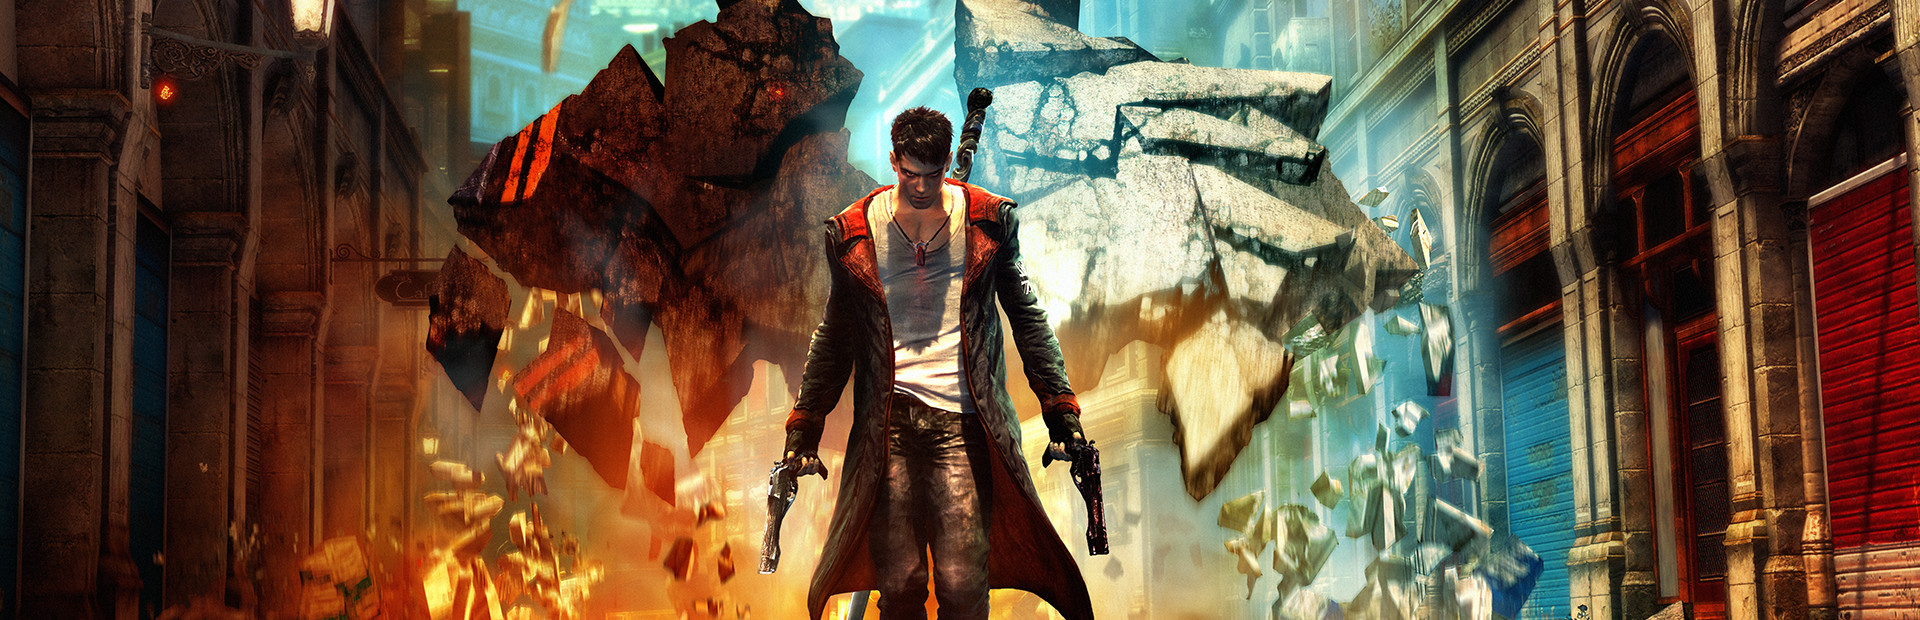 DmC: Devil May Cry cover image